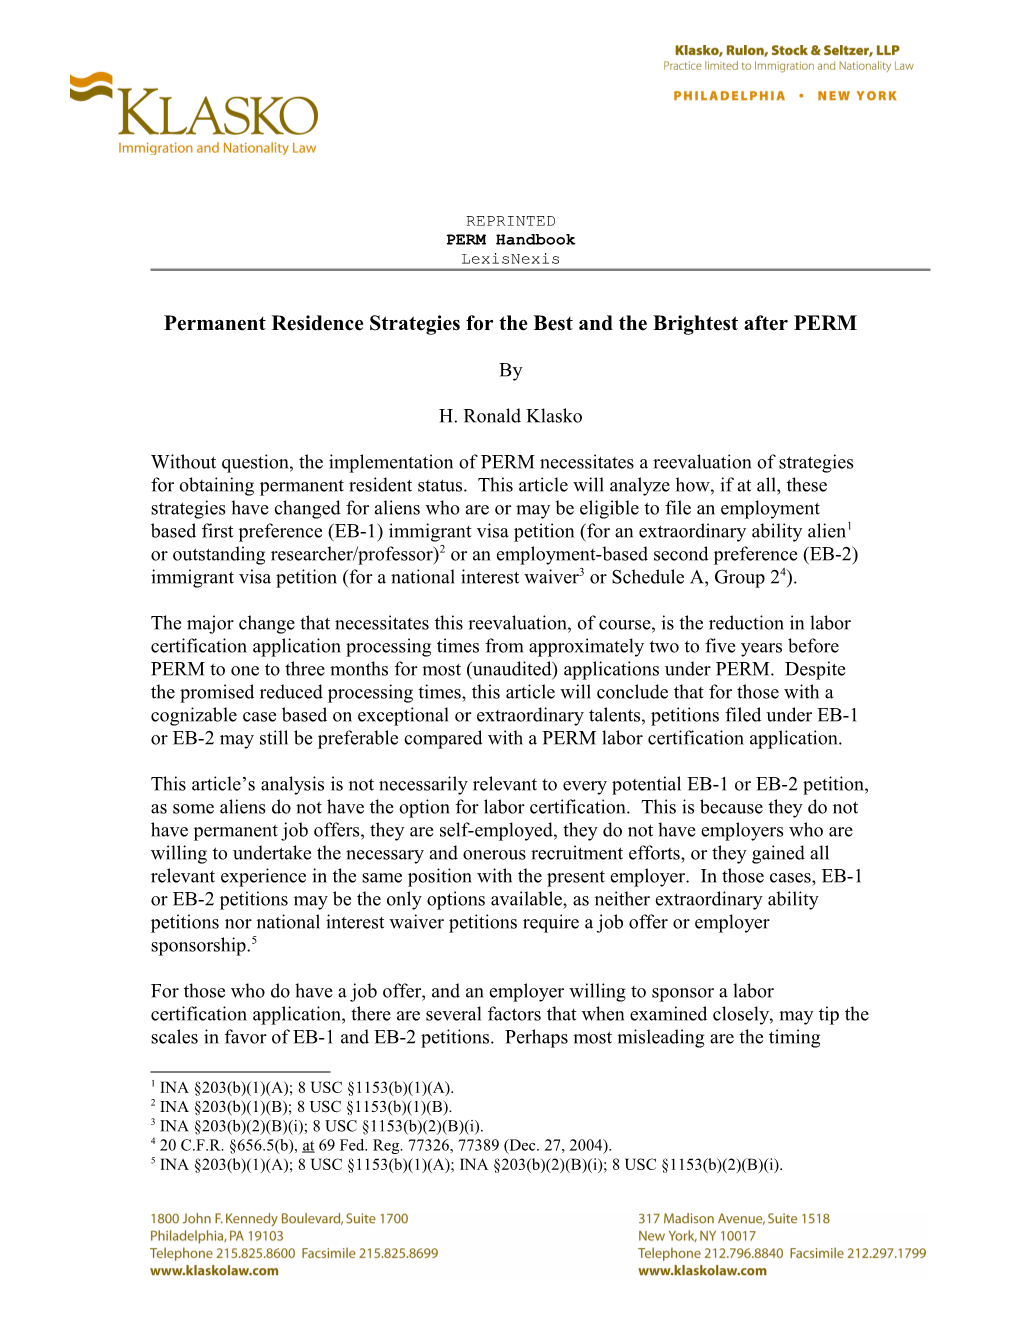 Permanent Residence Strategies - Syl Comments (Revised) (00062107;3)